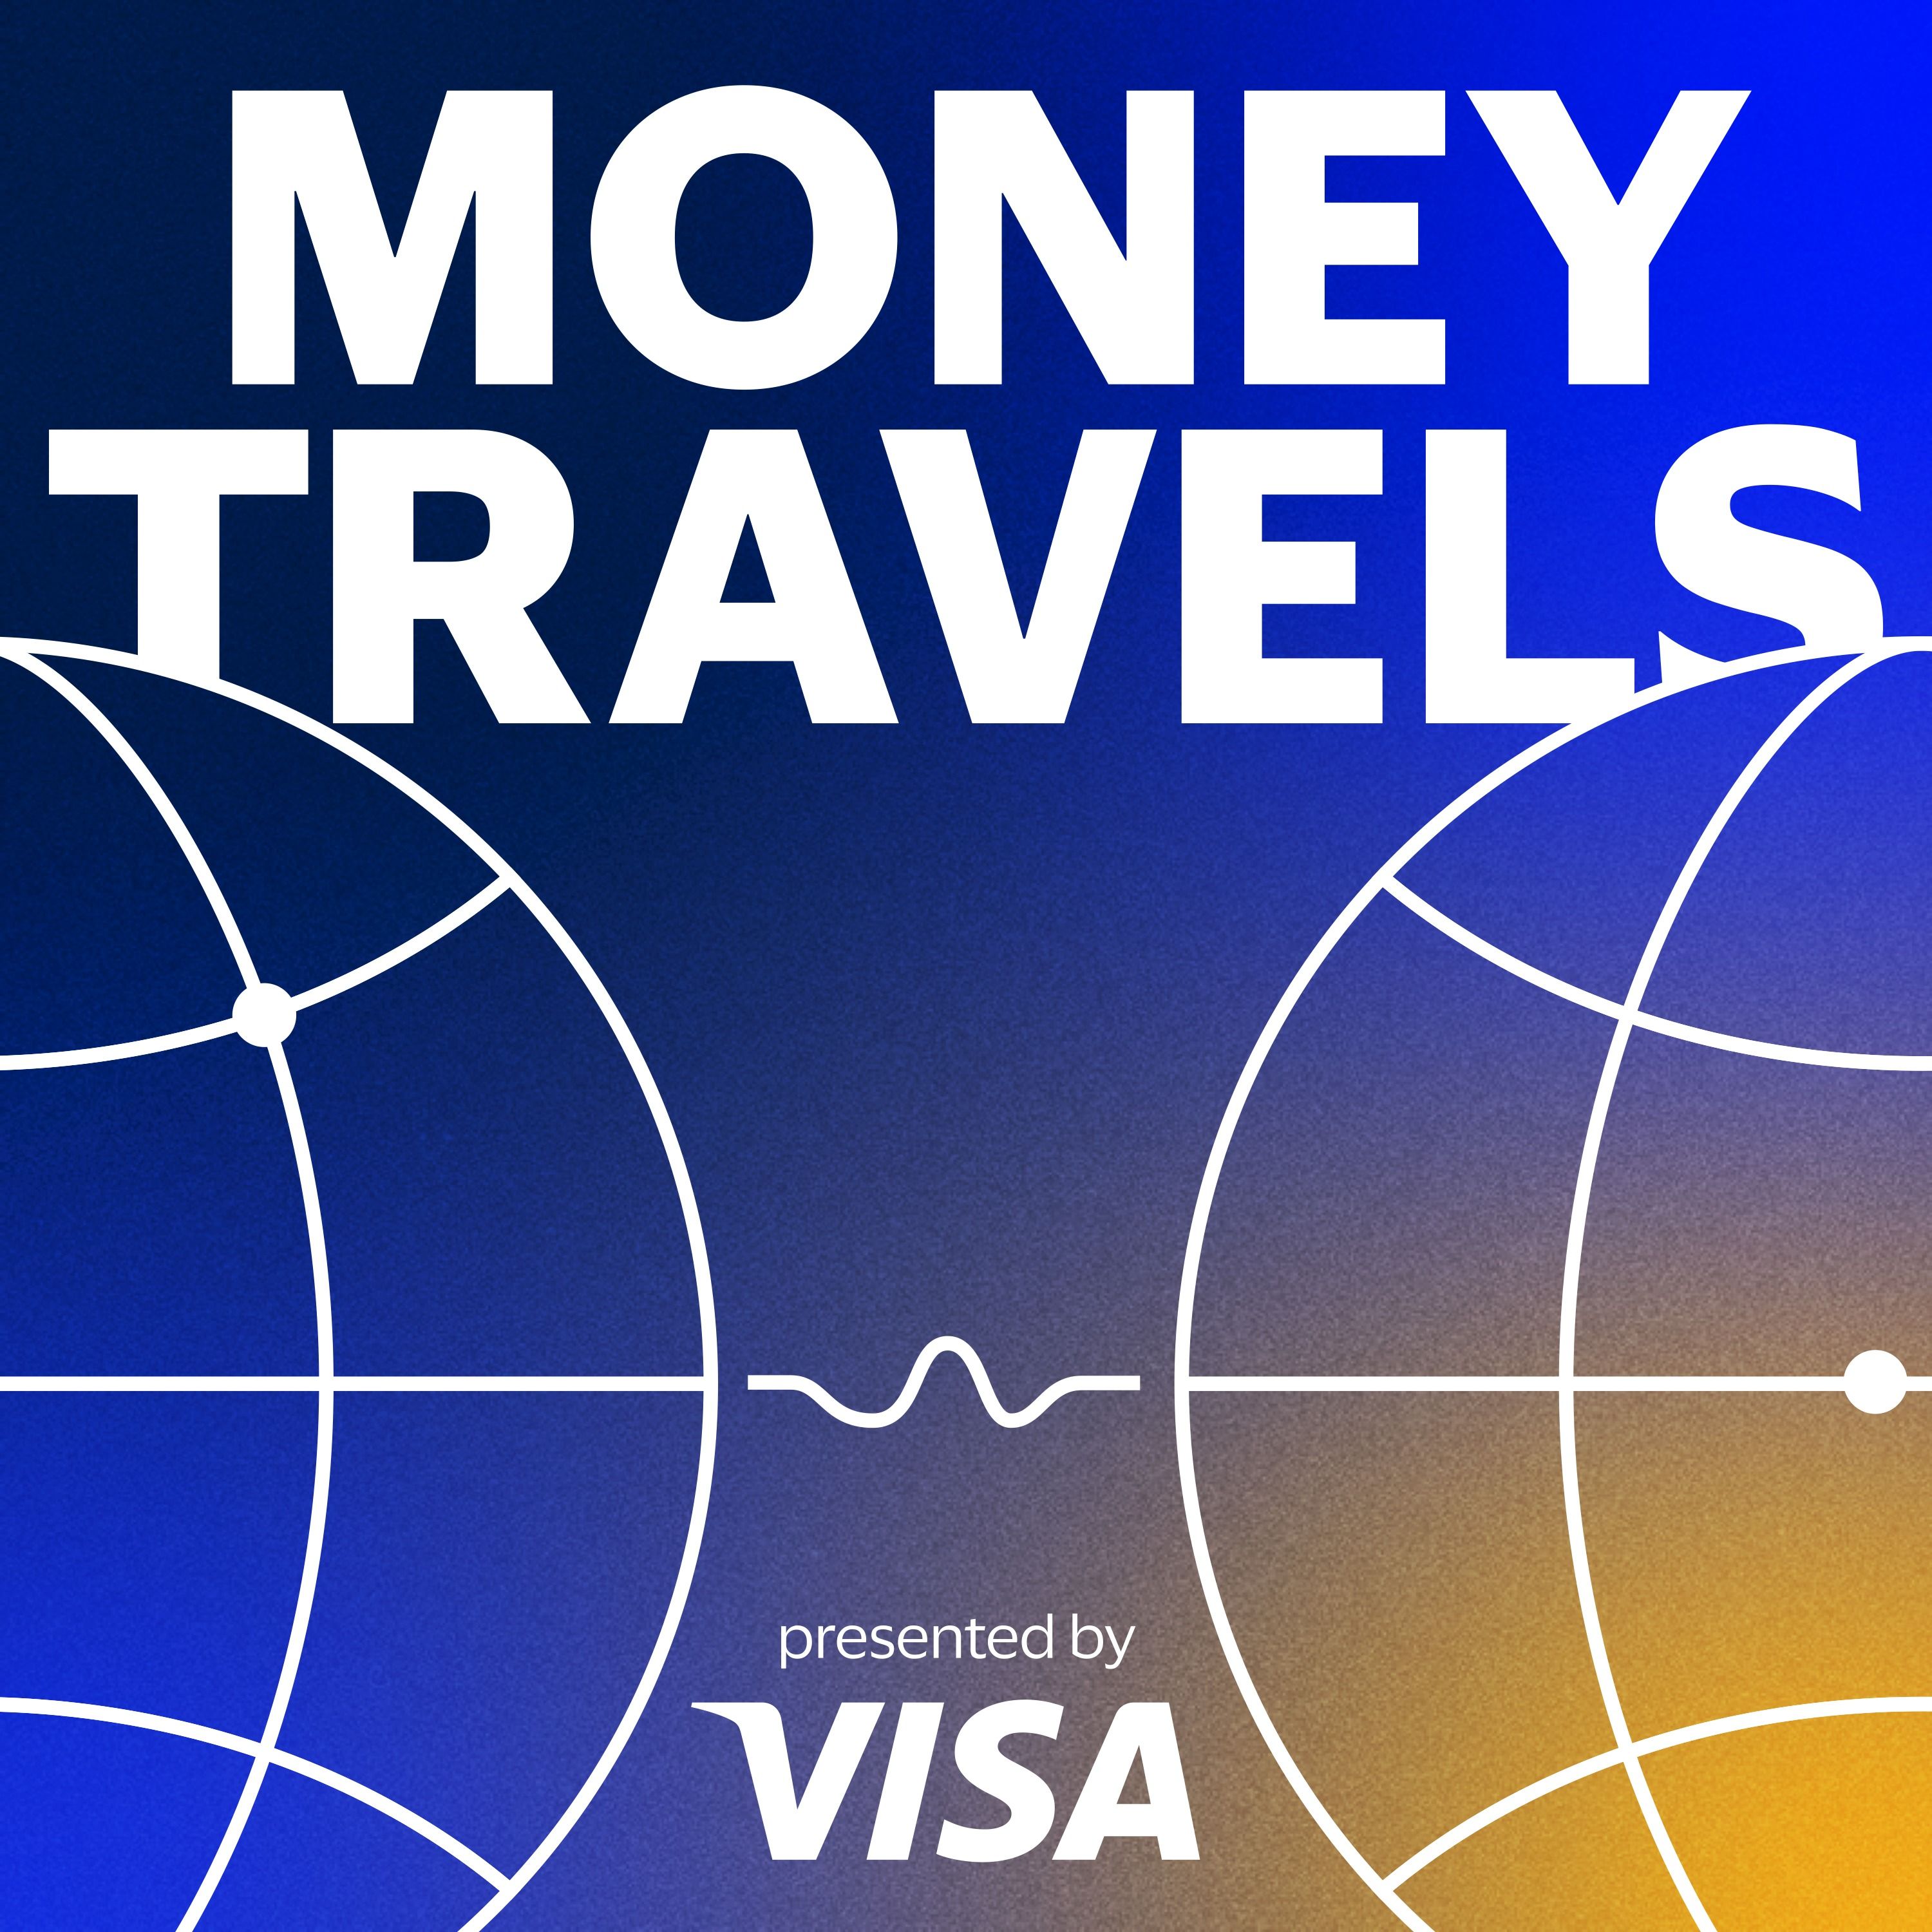 Frequent Flyers: The Microtisation of Remittances